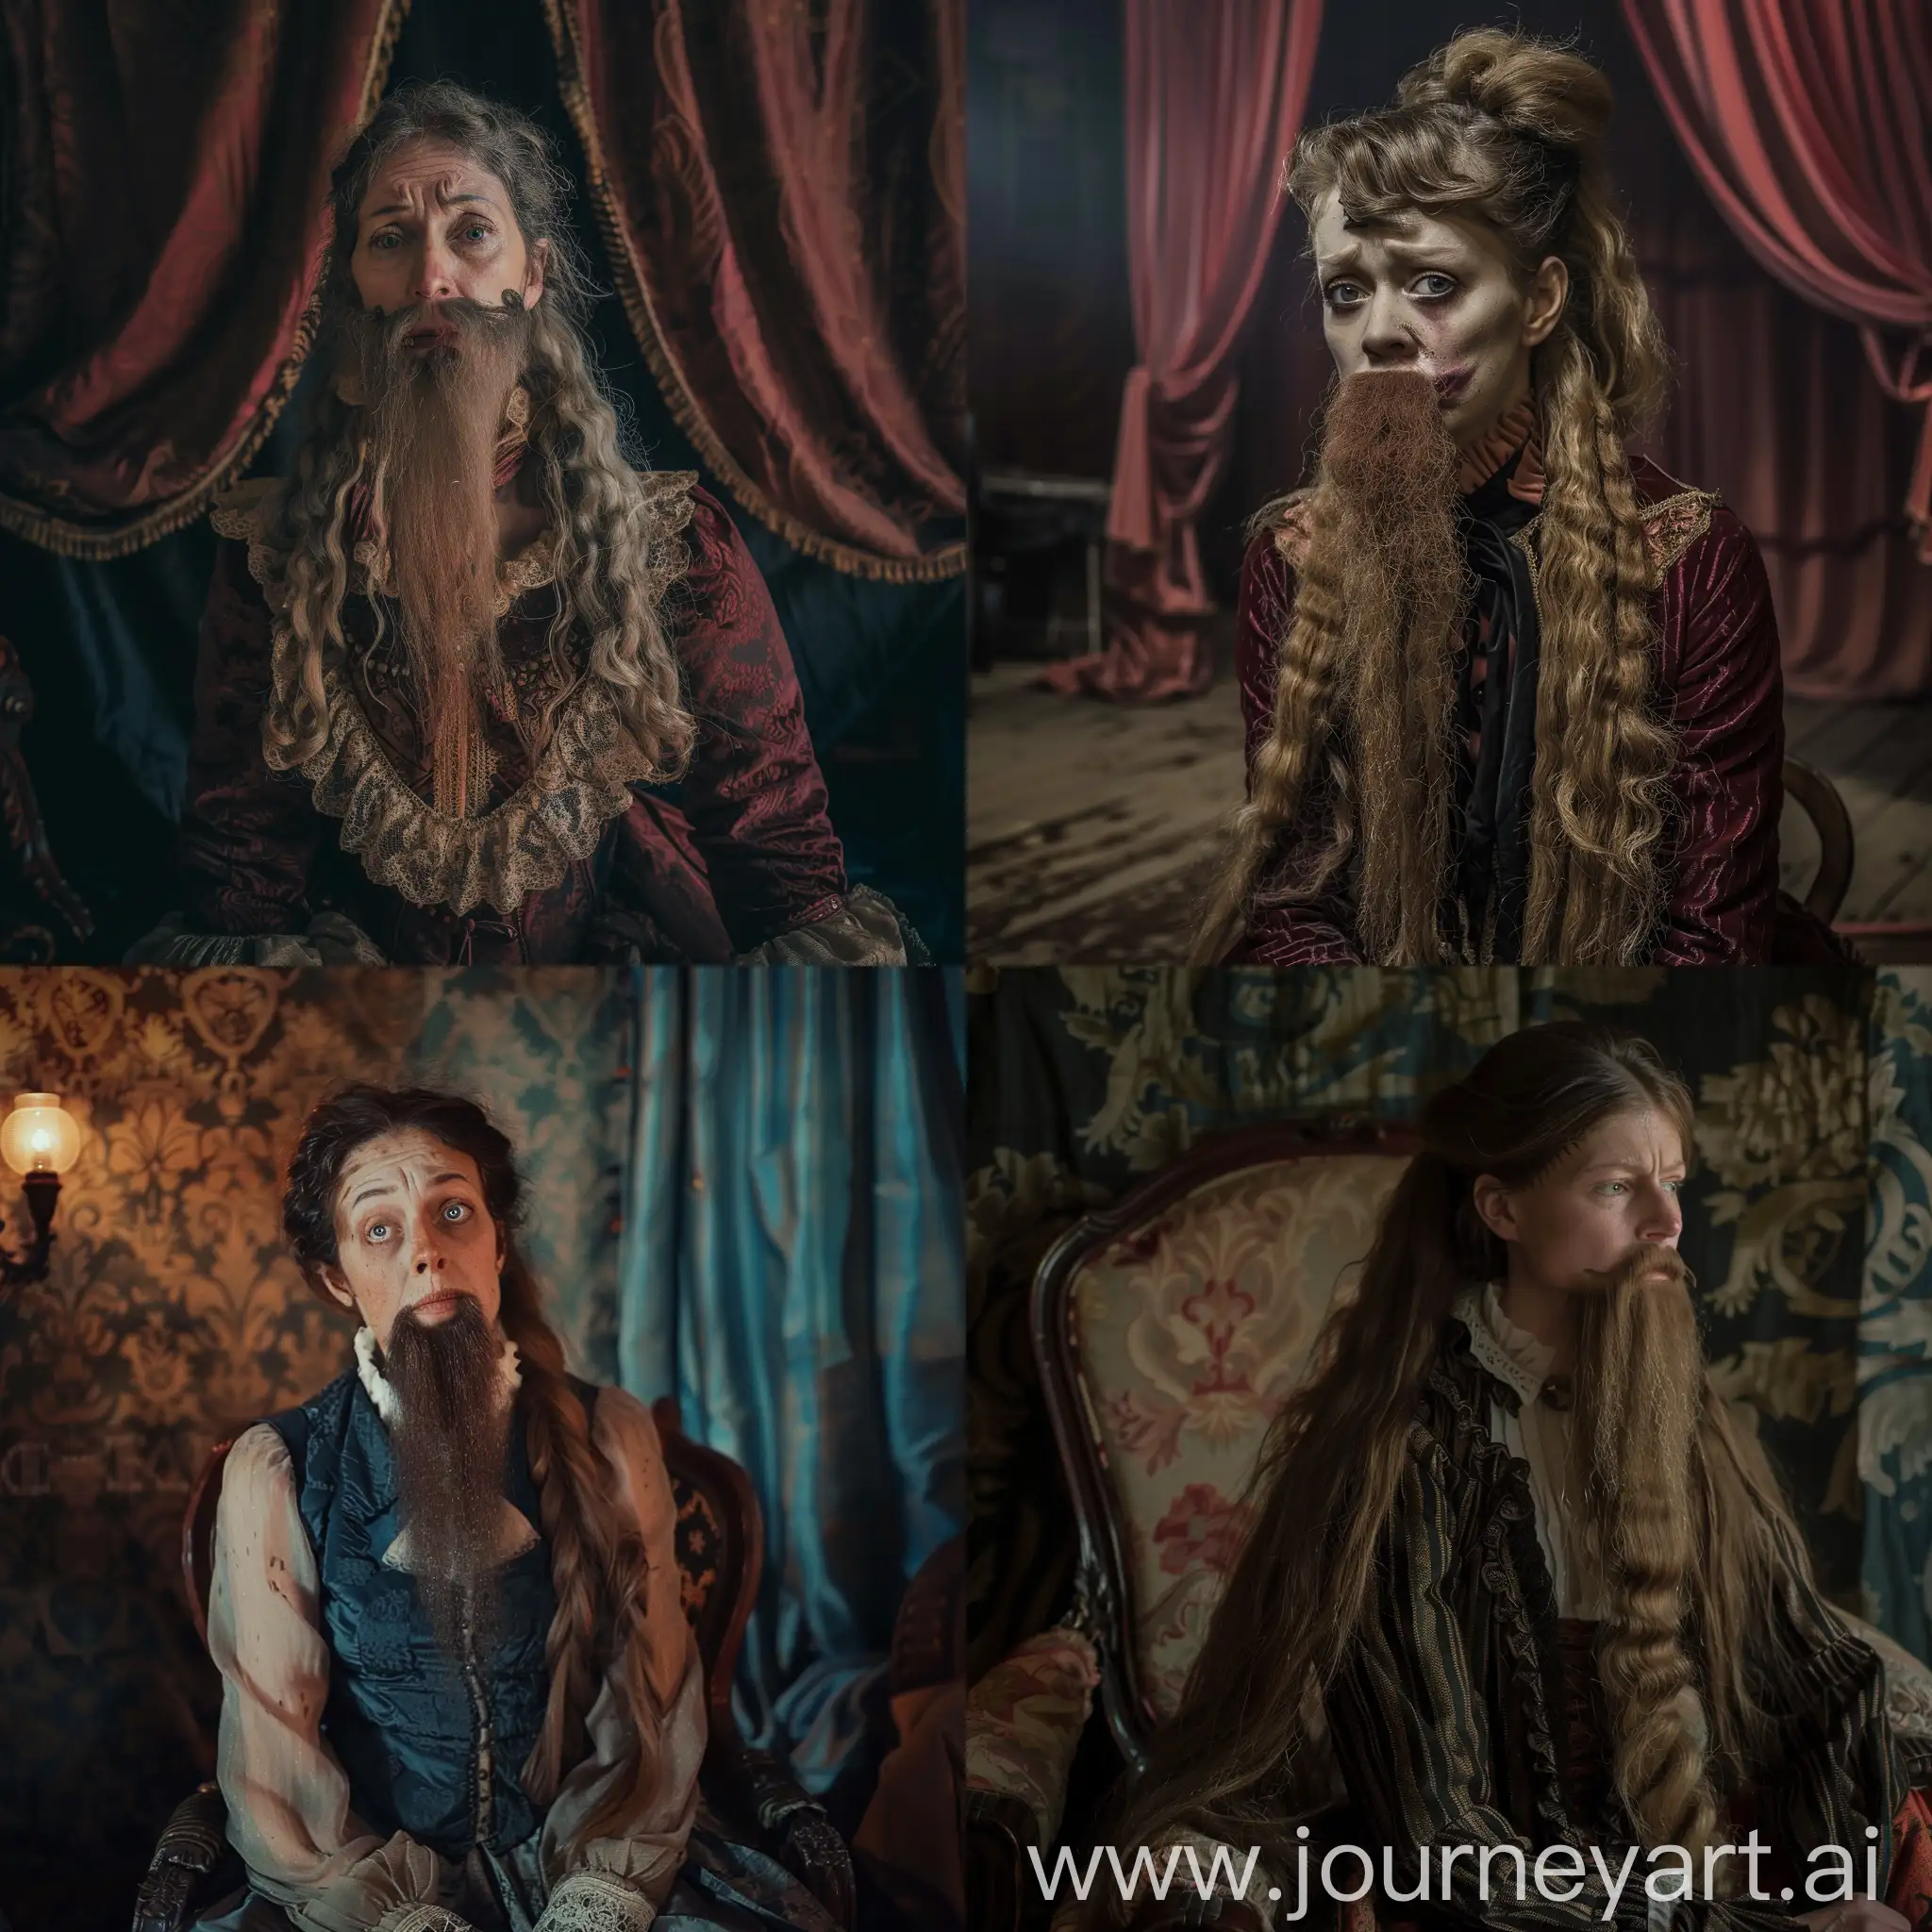 Woman with long beard, depicted in 1800's clothes, exhibited in circus, freak, she seems sad, 1800's fashion, cinematic lighting